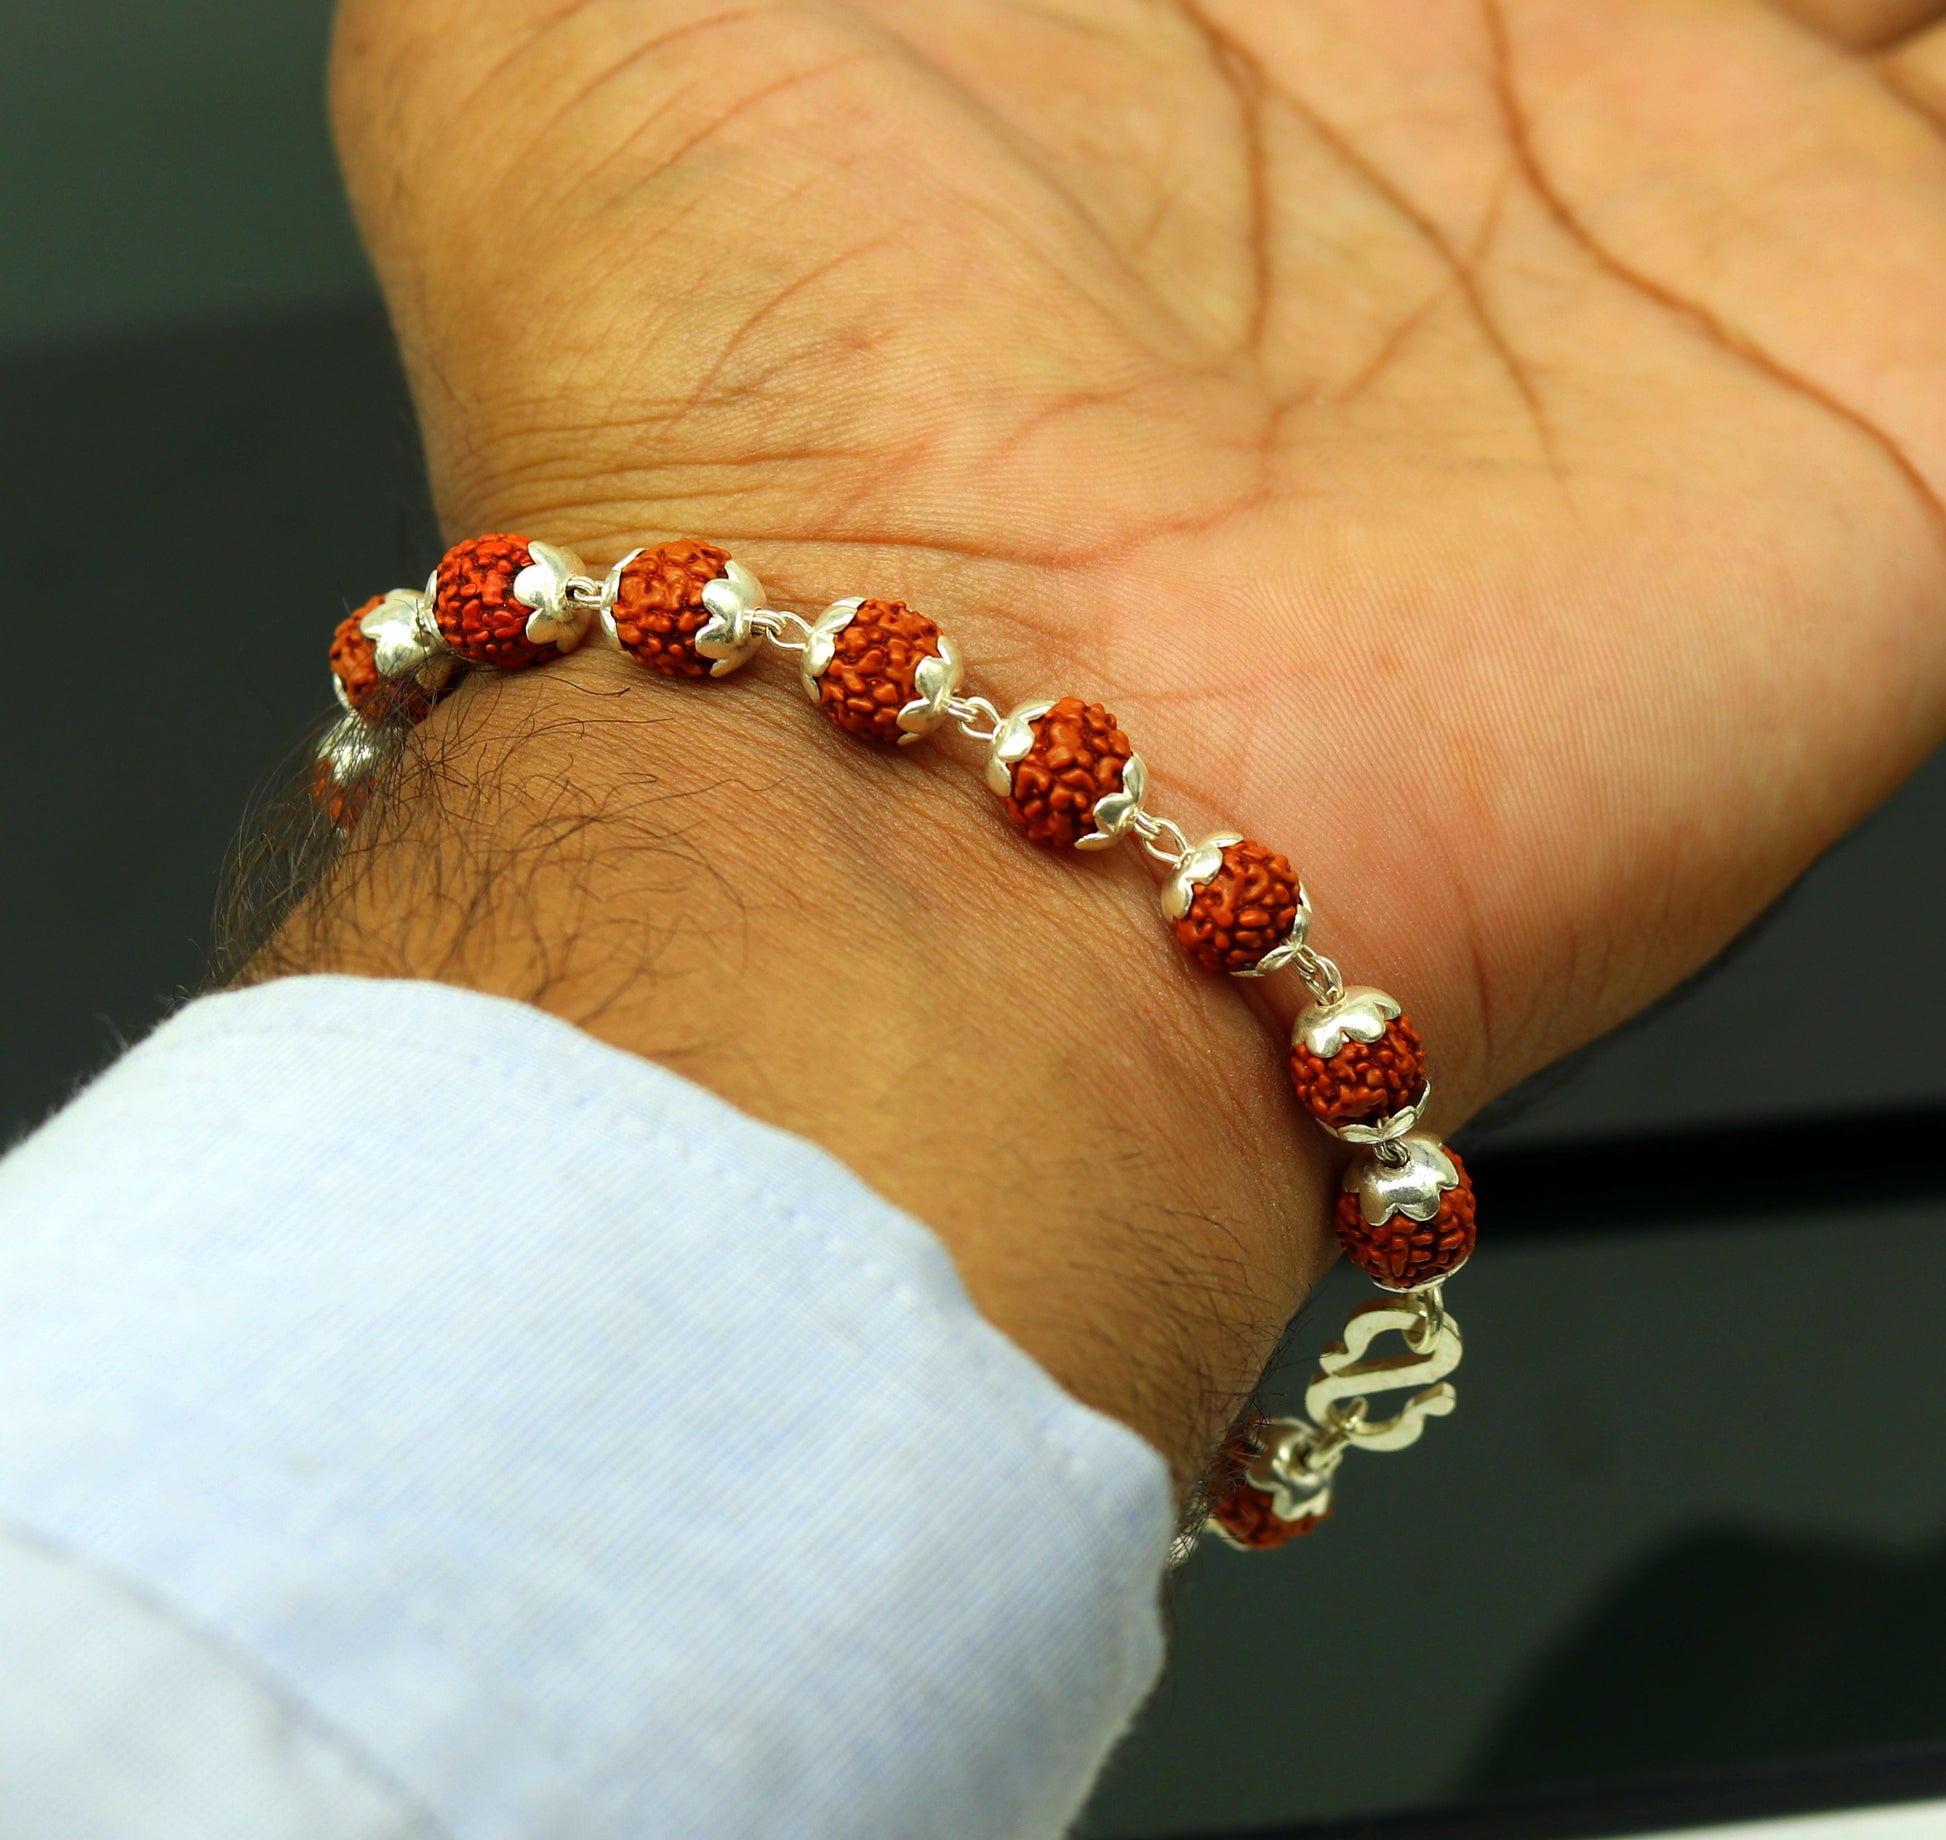 8.5" long handmade gorgeous Rudraksha beads bracelet, excellent customized gifting personalized unisex jewelry from india sbr198 - TRIBAL ORNAMENTS